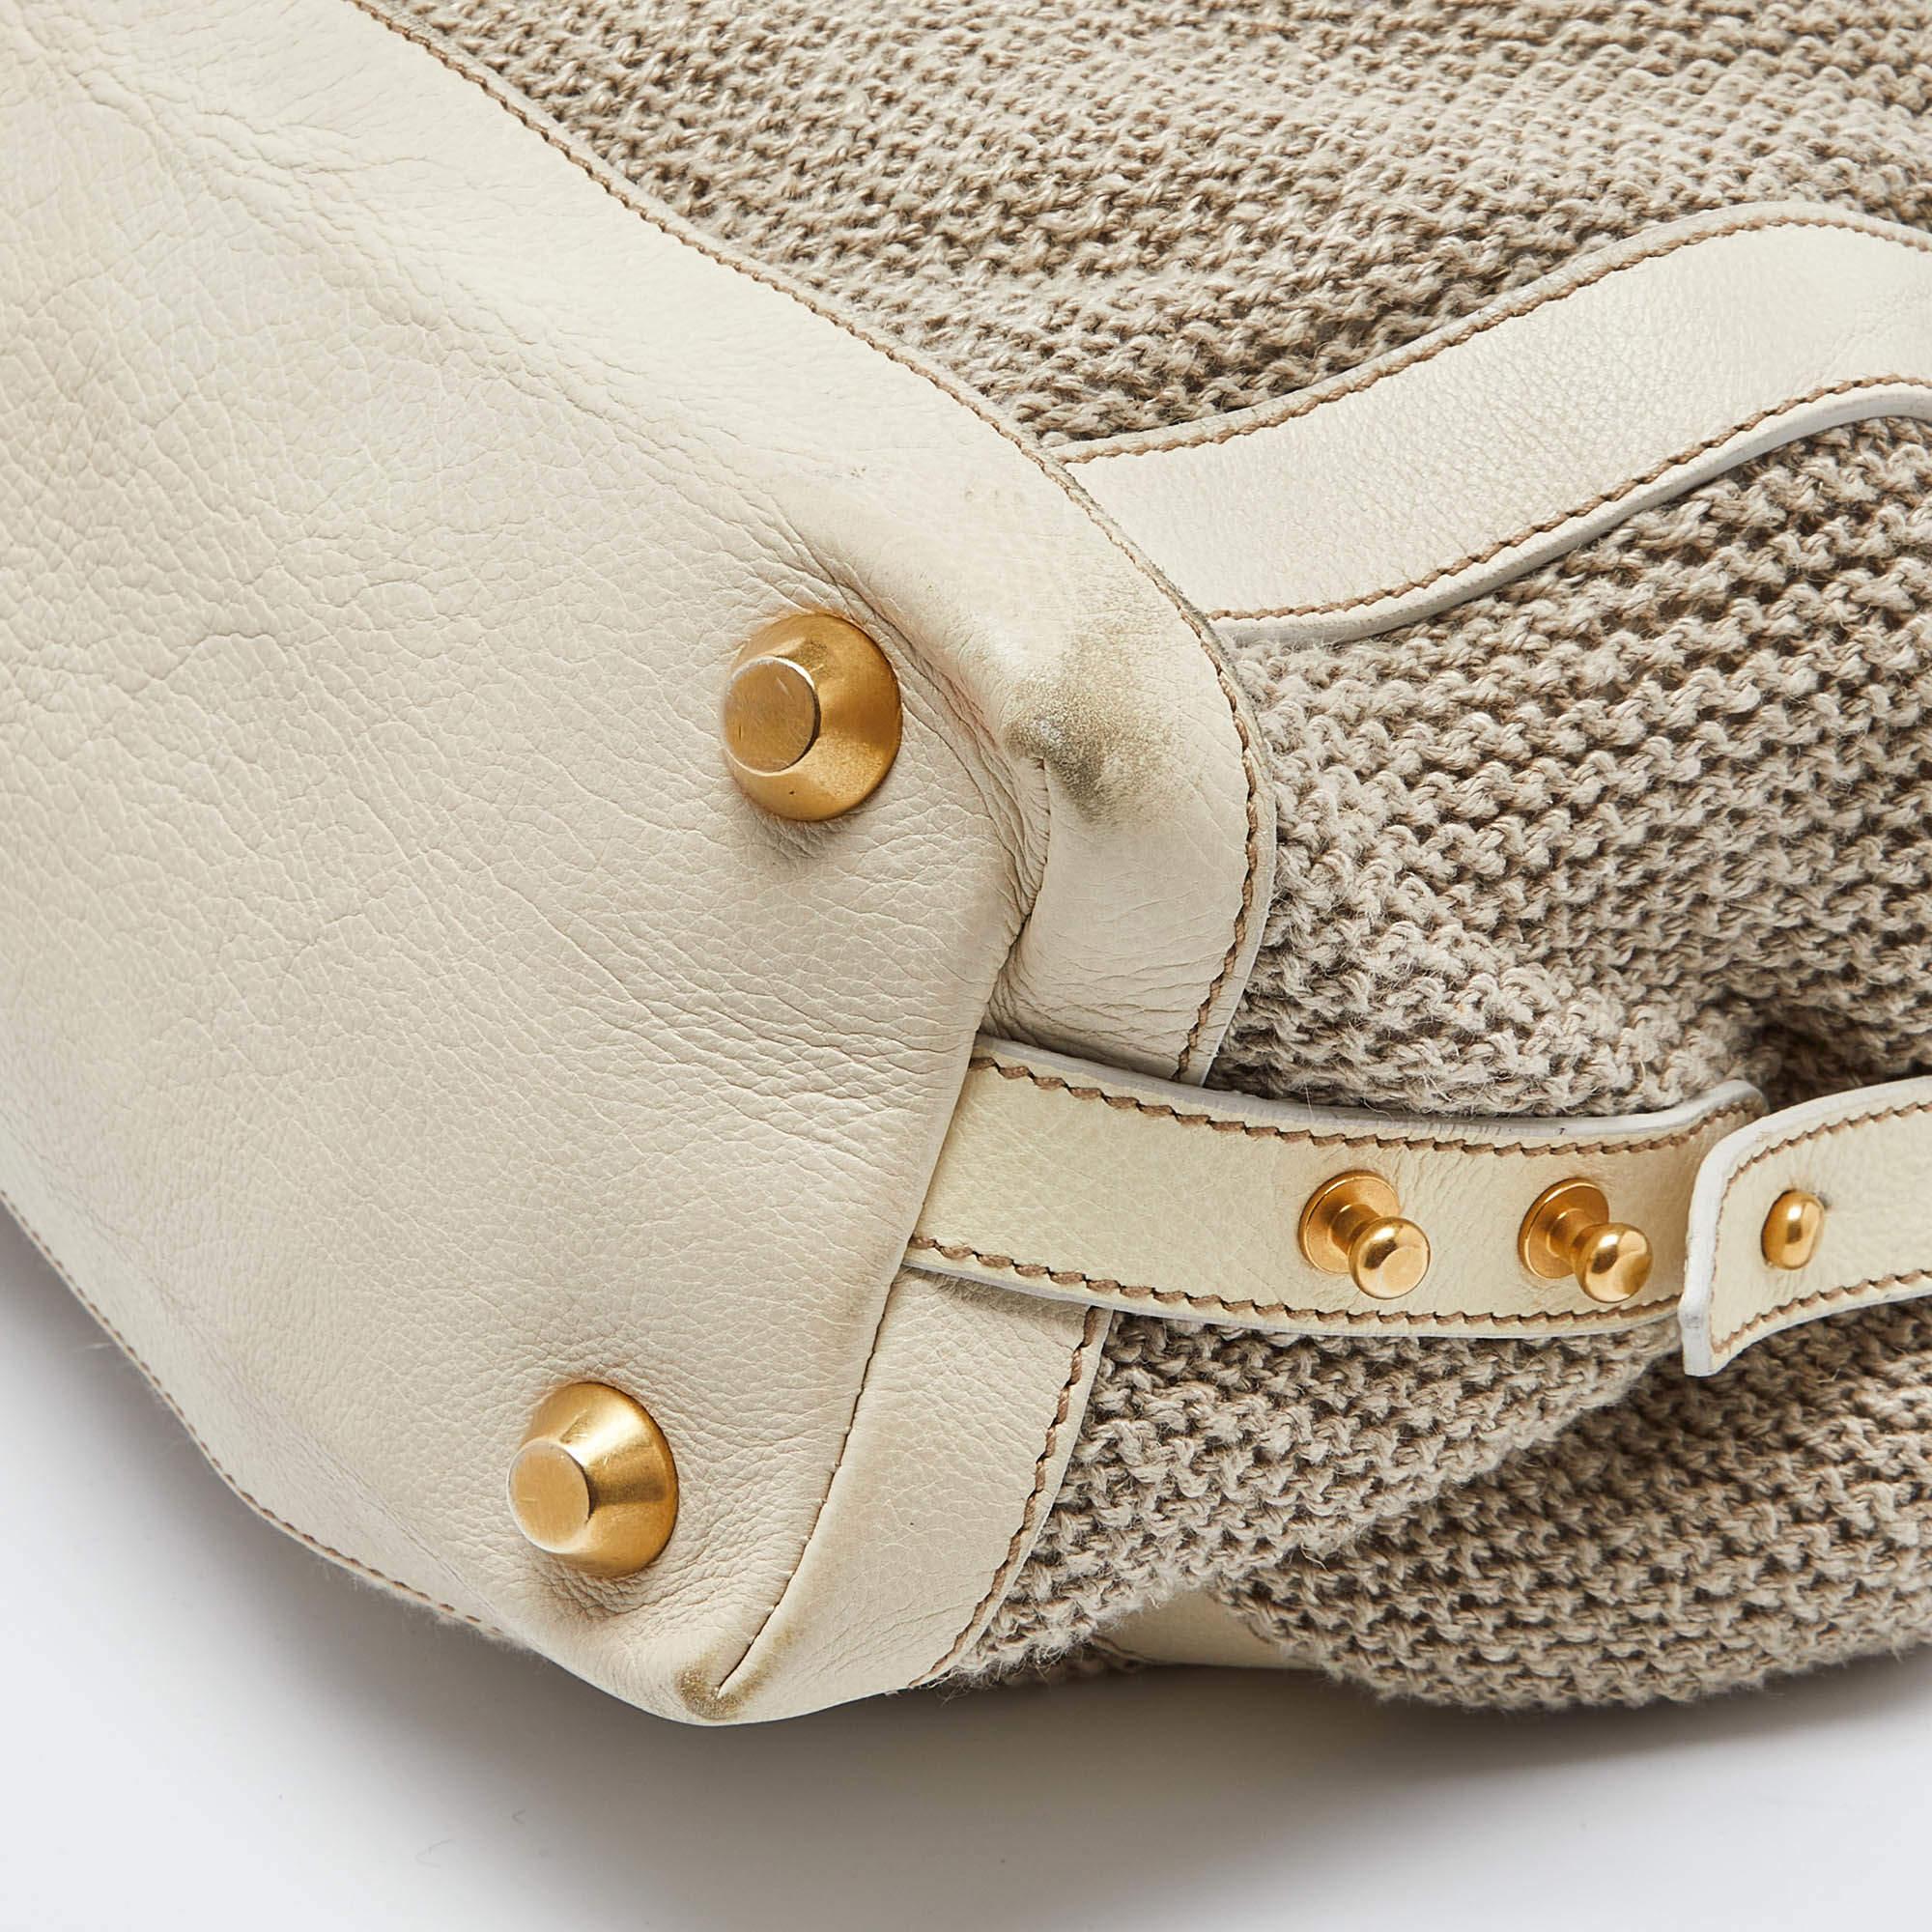 Miu Miu Cream Woven Fabric and Leather Satchel For Sale 4